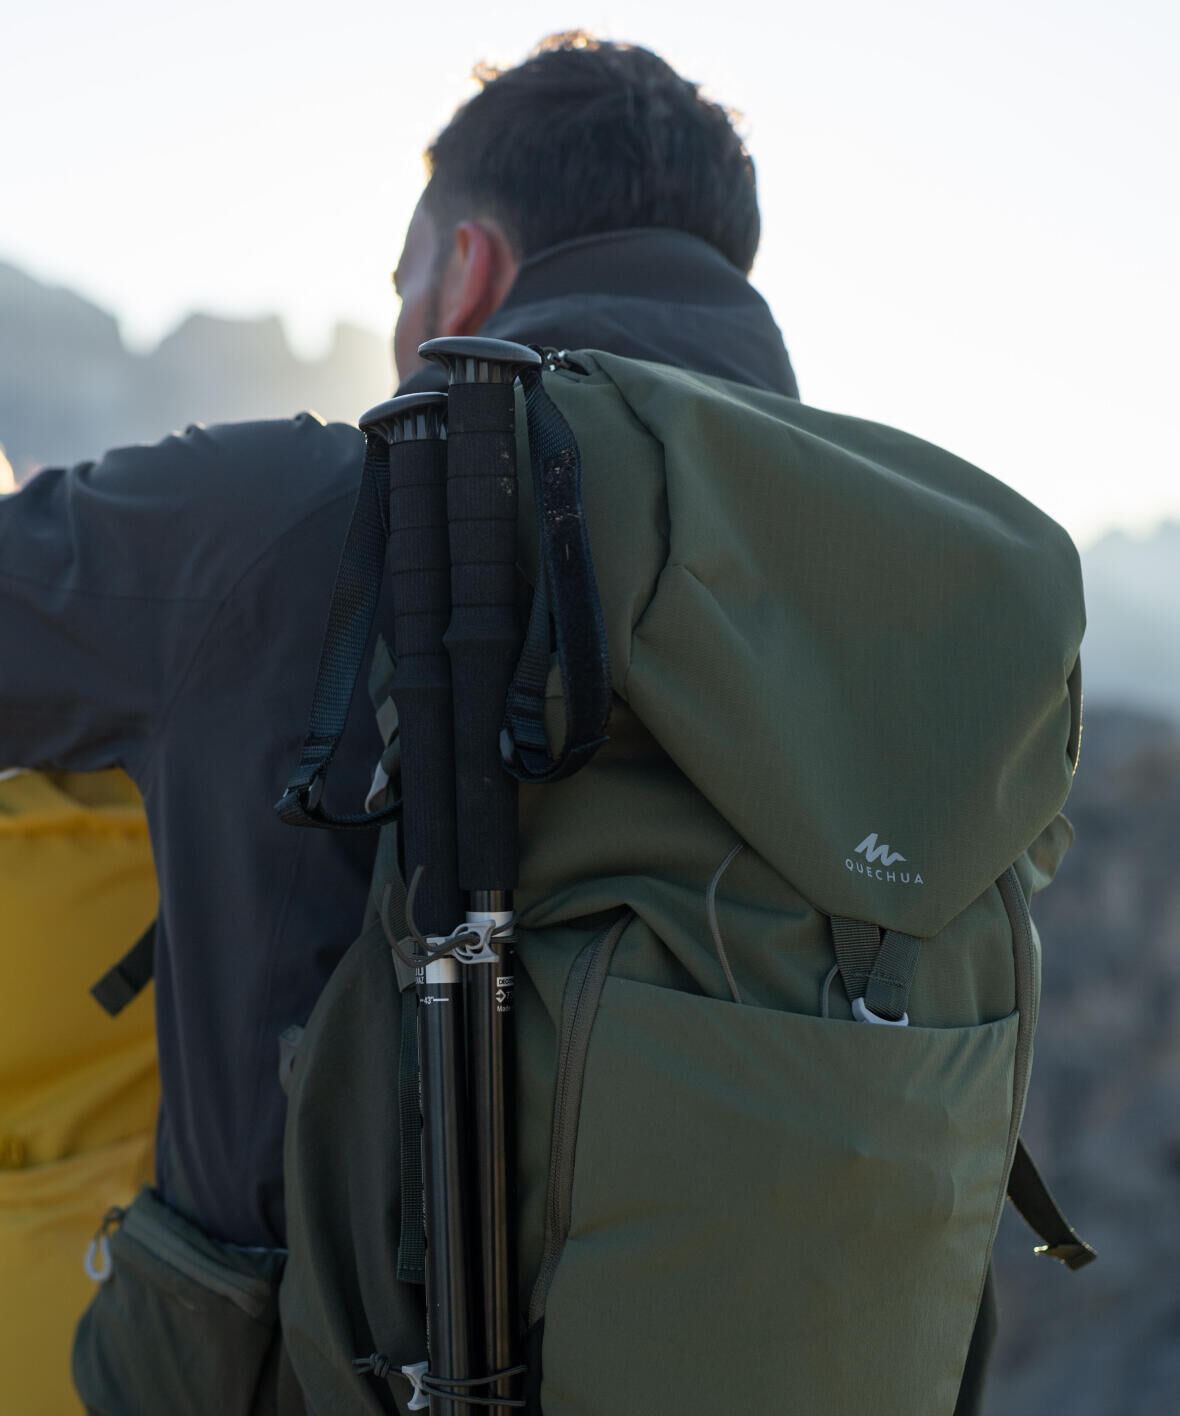  How to adjust your hiking backpack 